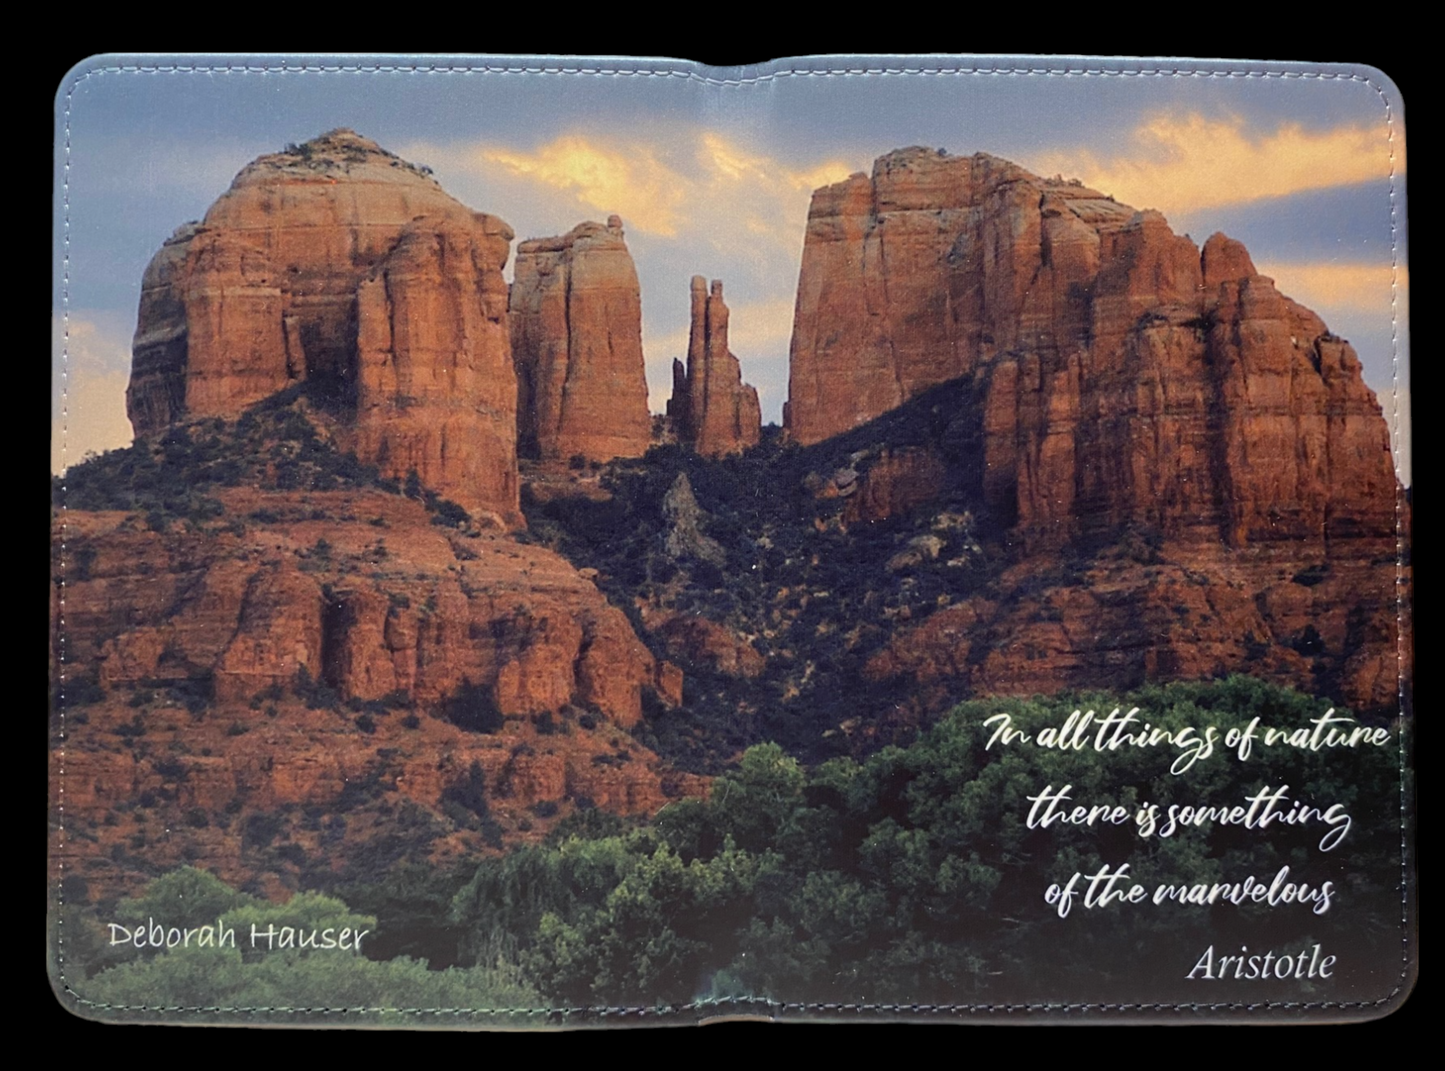 Cover shown fully open, Image Cathedral Rock in Sedona, AZ